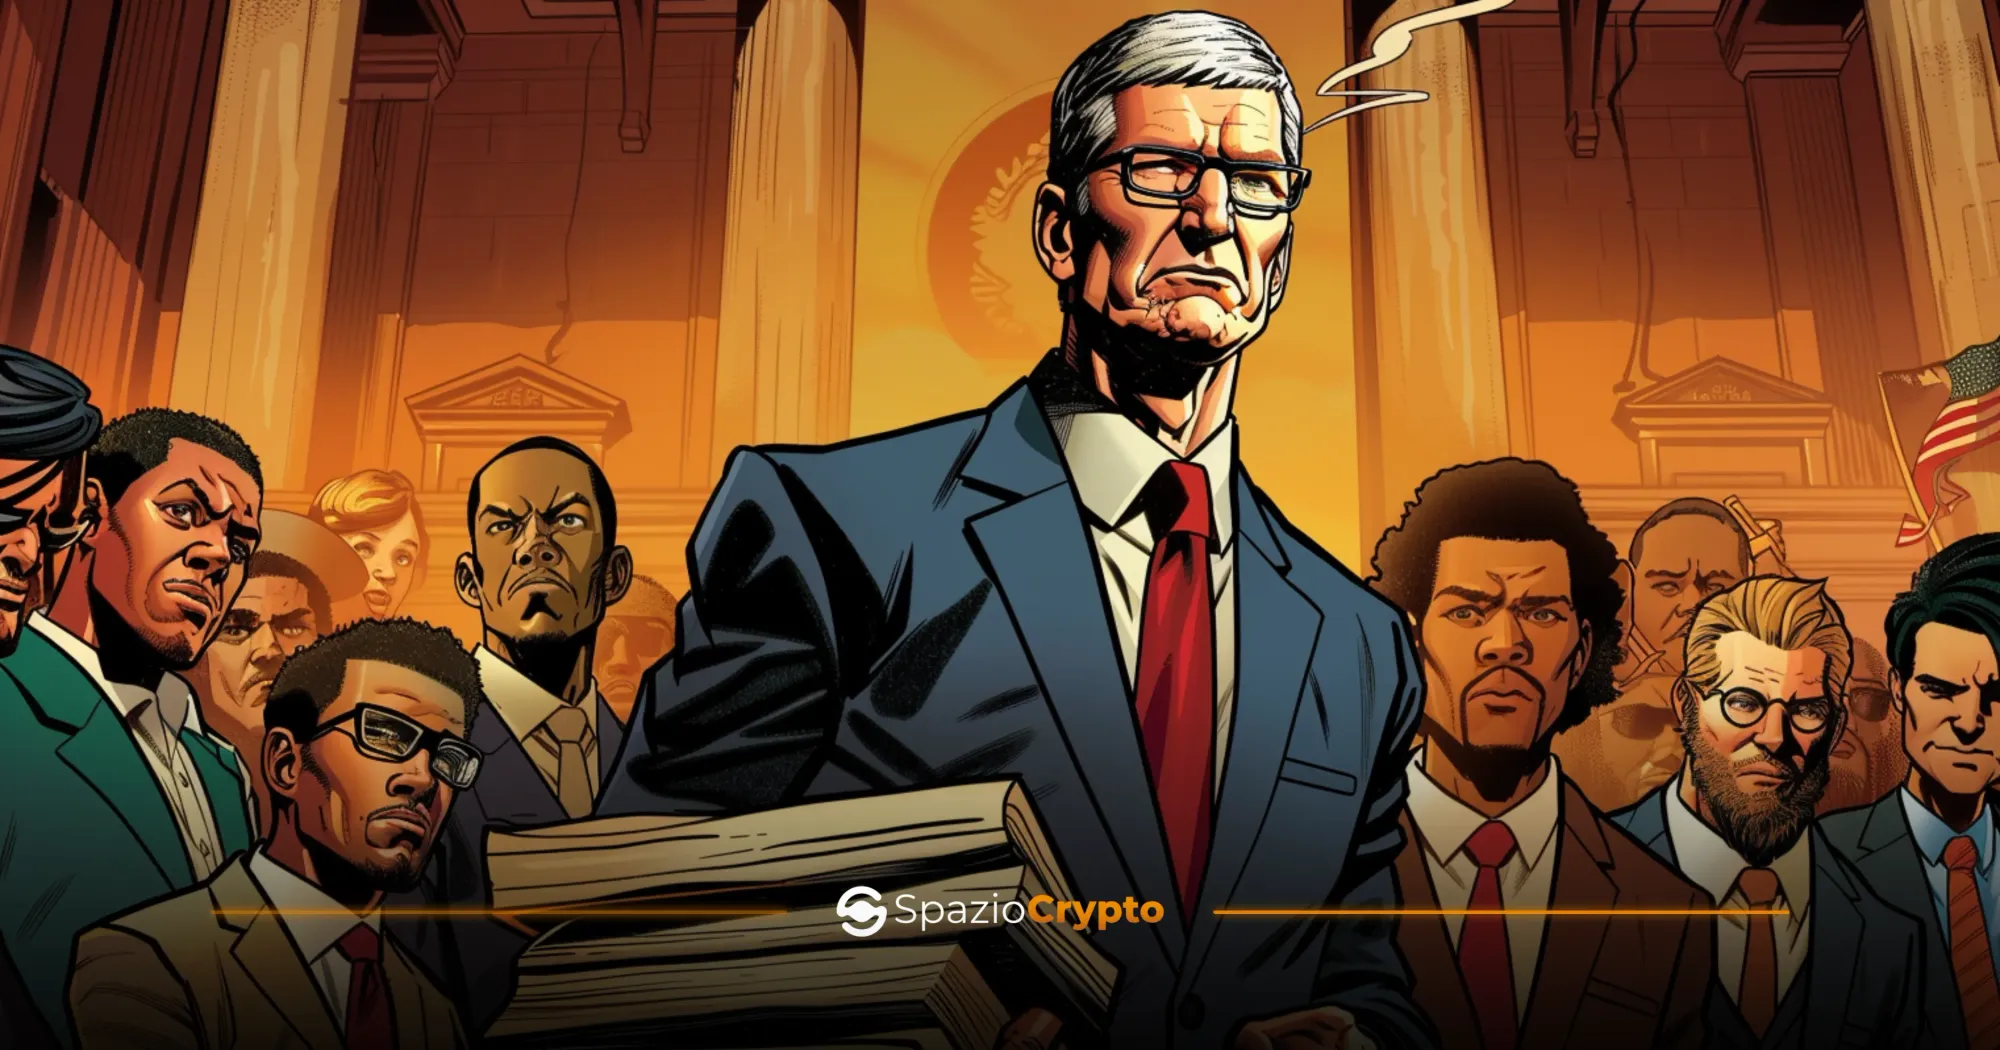 Tim Cook and Apple win the case | Spaziocrypto